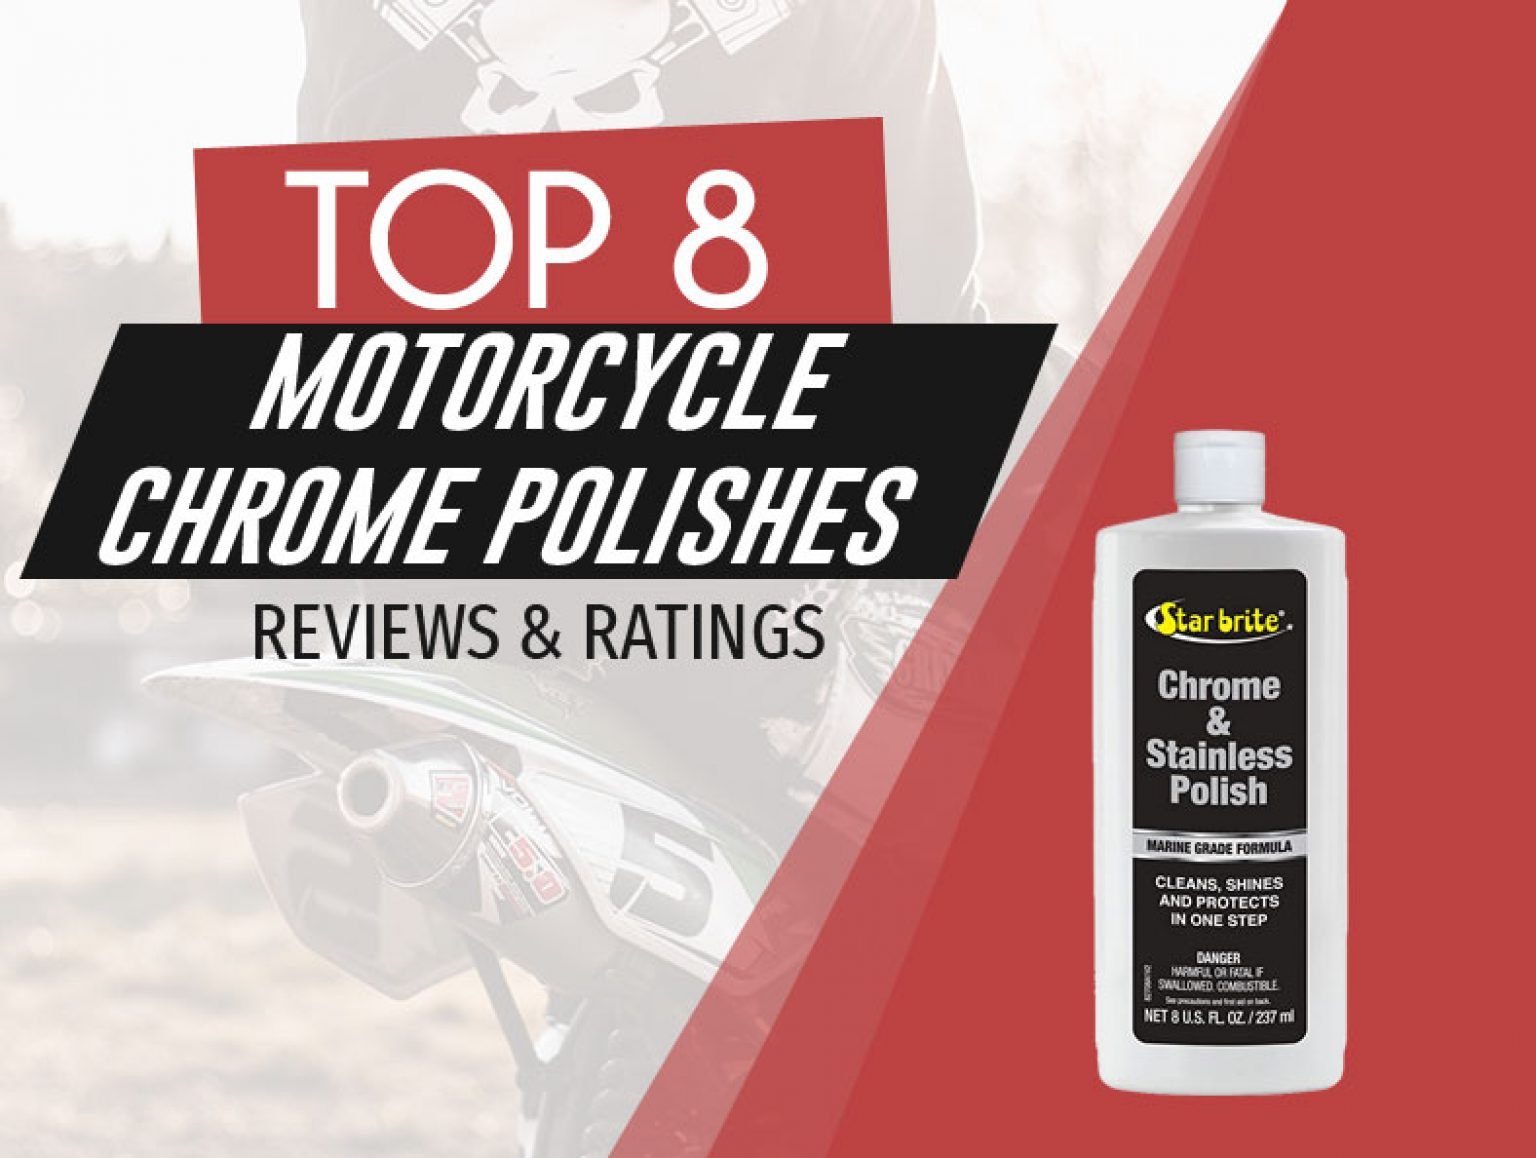 Best Motorcycle Chrome Polish Reviewed for 2021